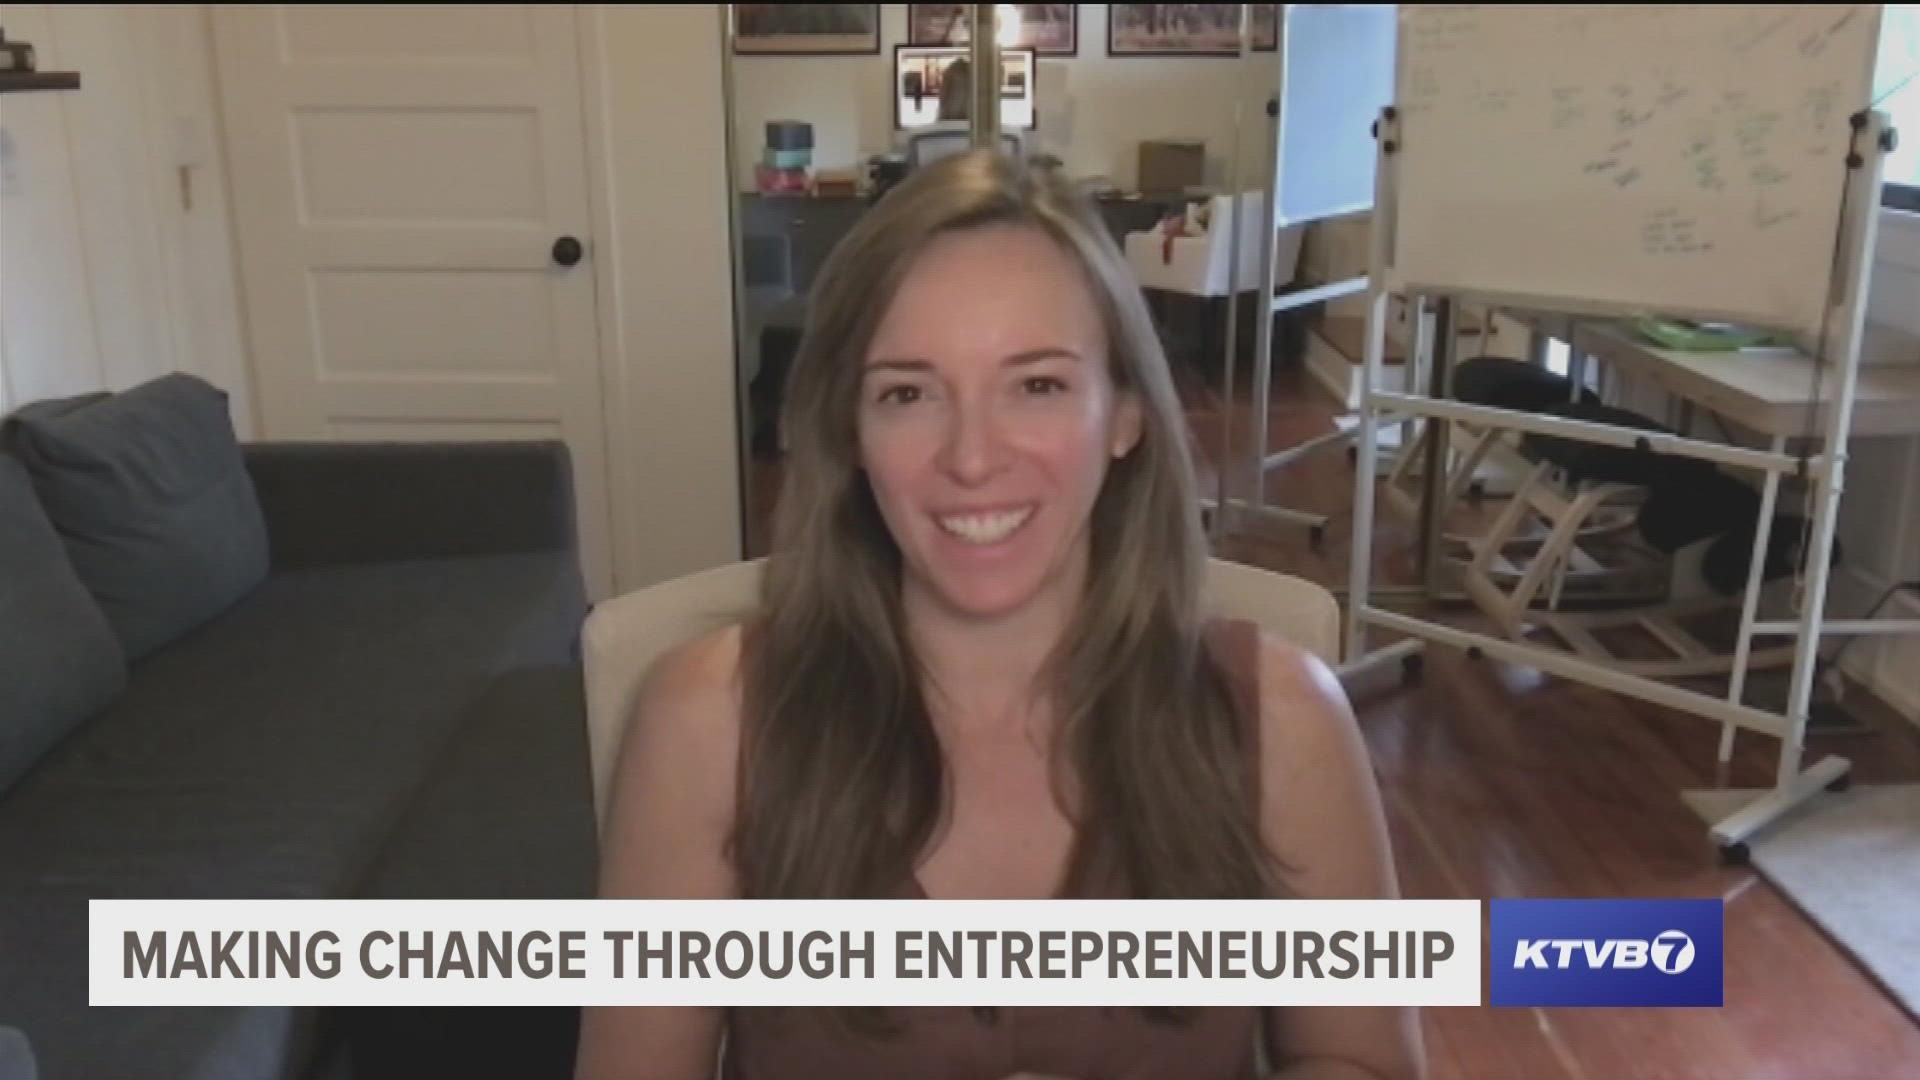 Jessica Jackley is an author and entrepreneur who started Kiva, the world's first and largest peer-to-peer micro-lending website.